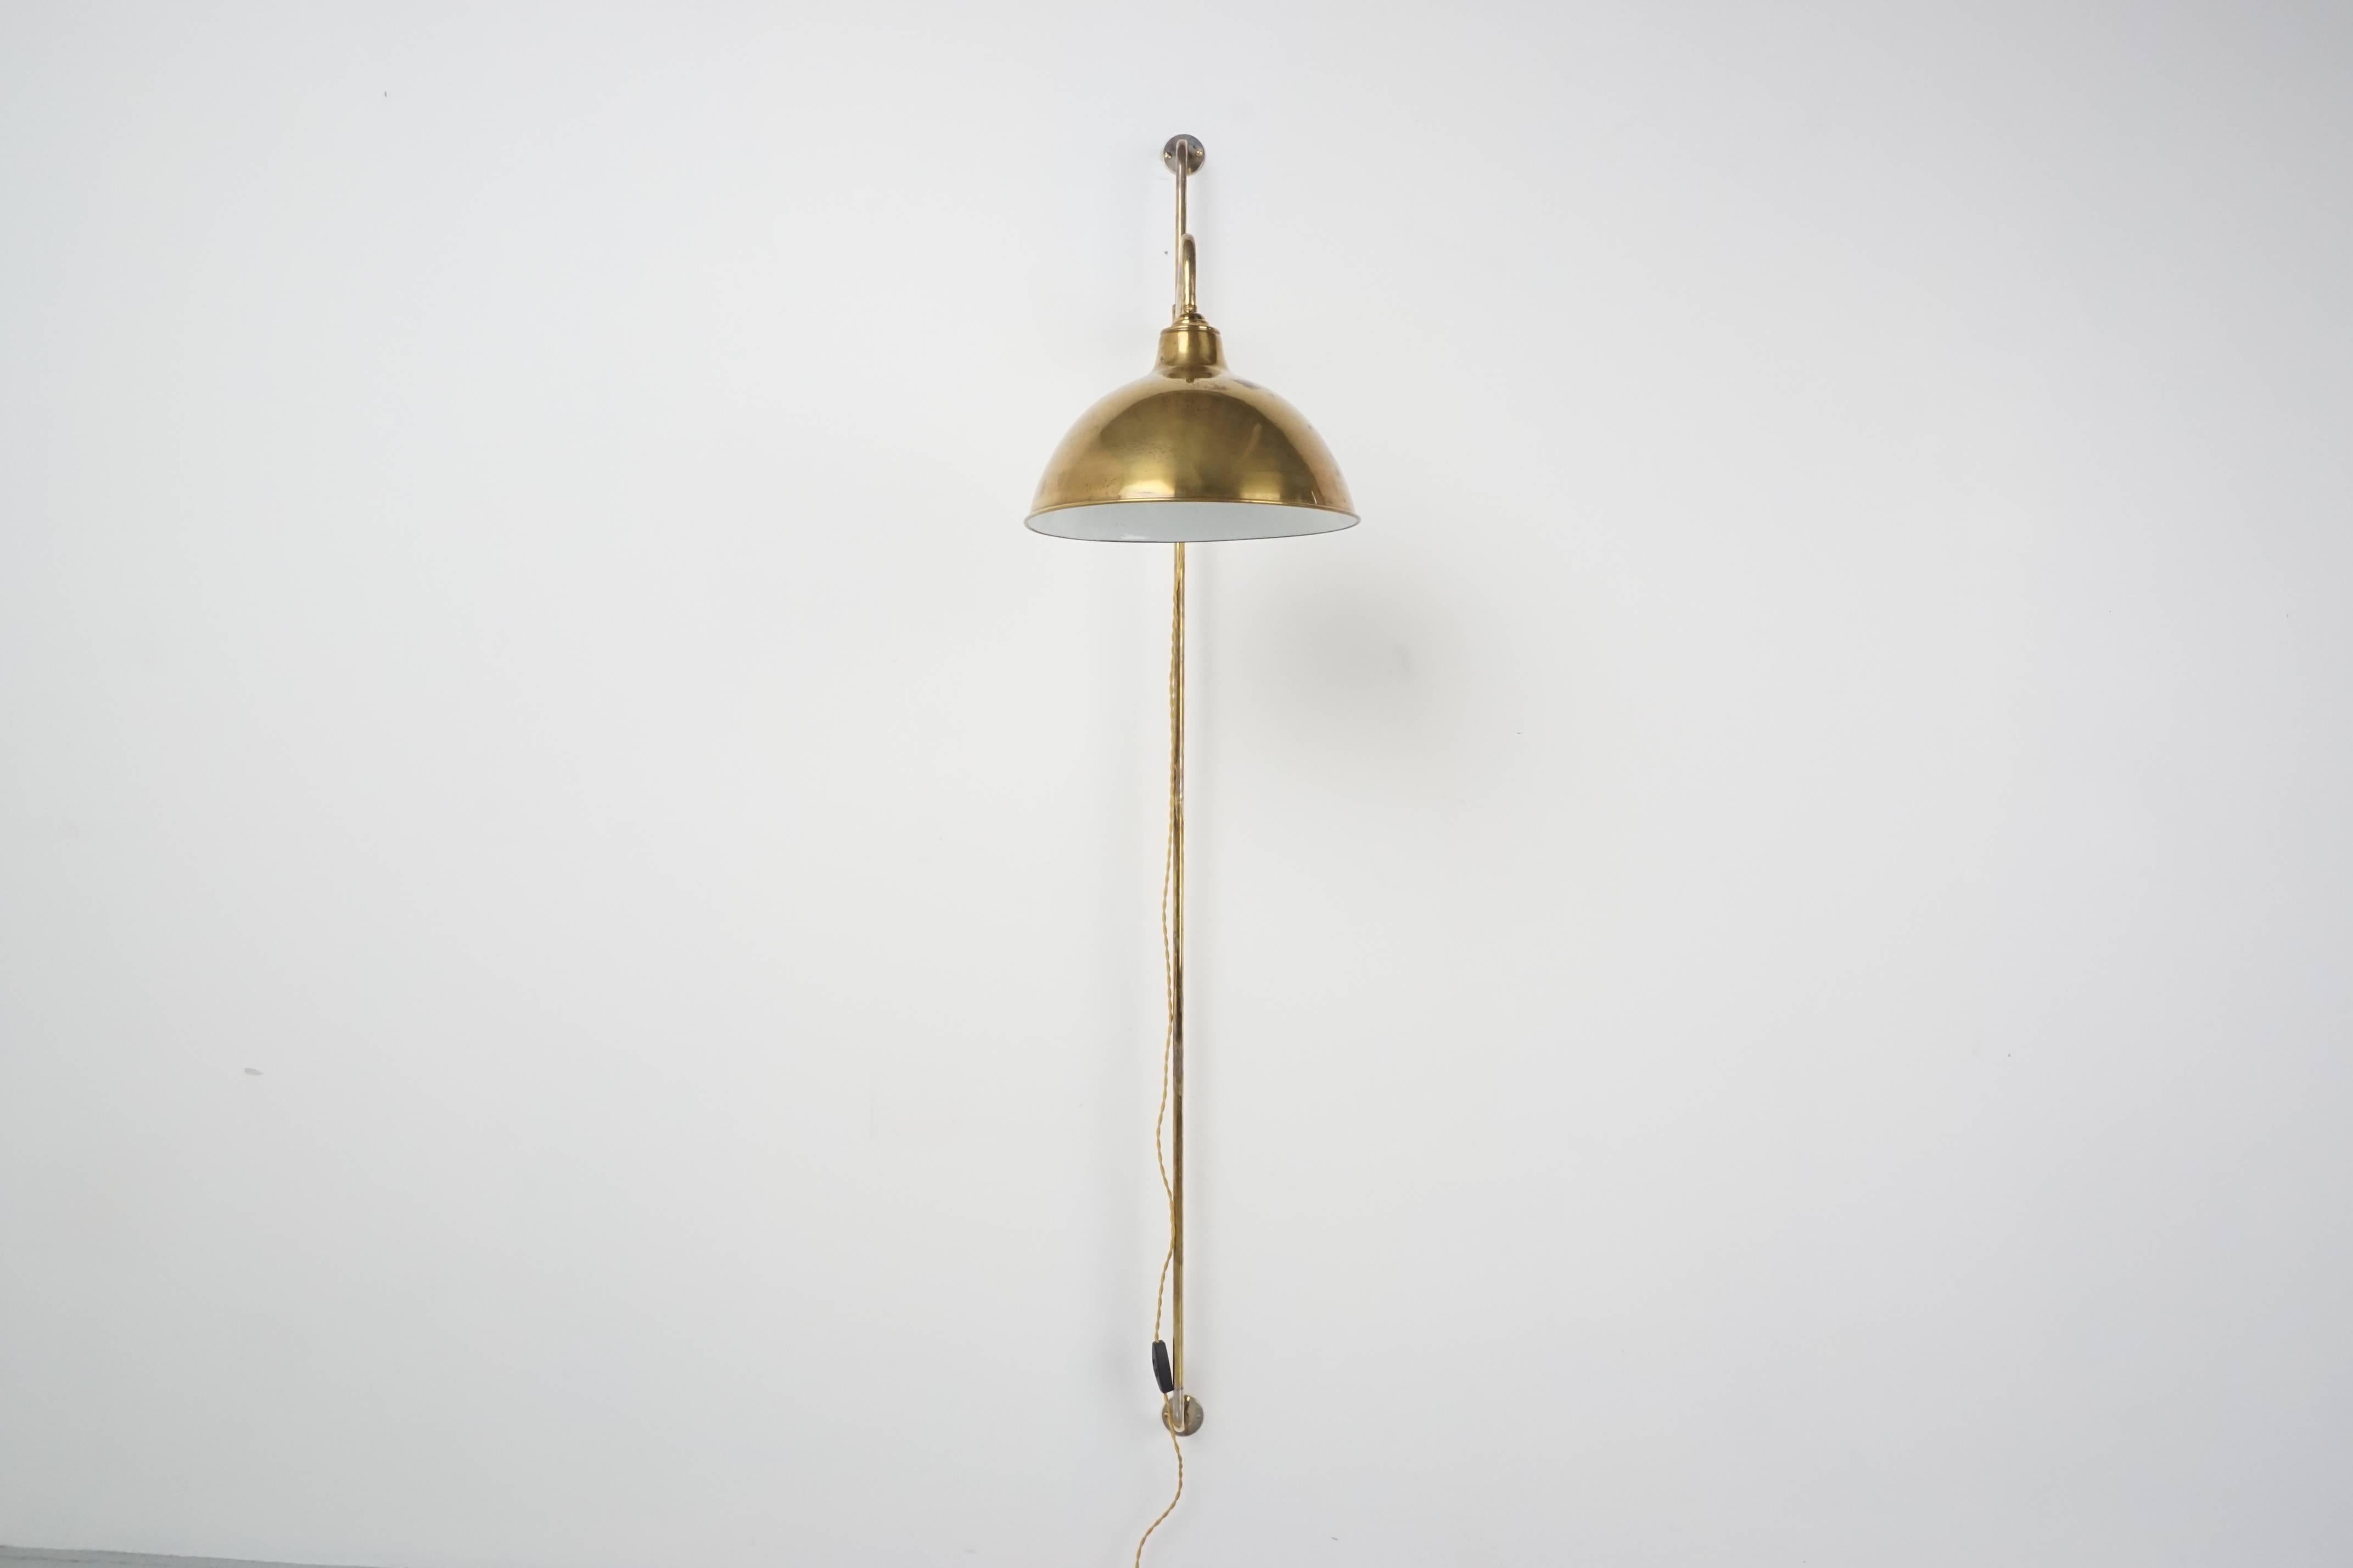 French pole sconce newly produced with a cantilevered arm holding a vintage brass dome shade. Simple, Classic design perfect for any room. 

Two available, priced individually.